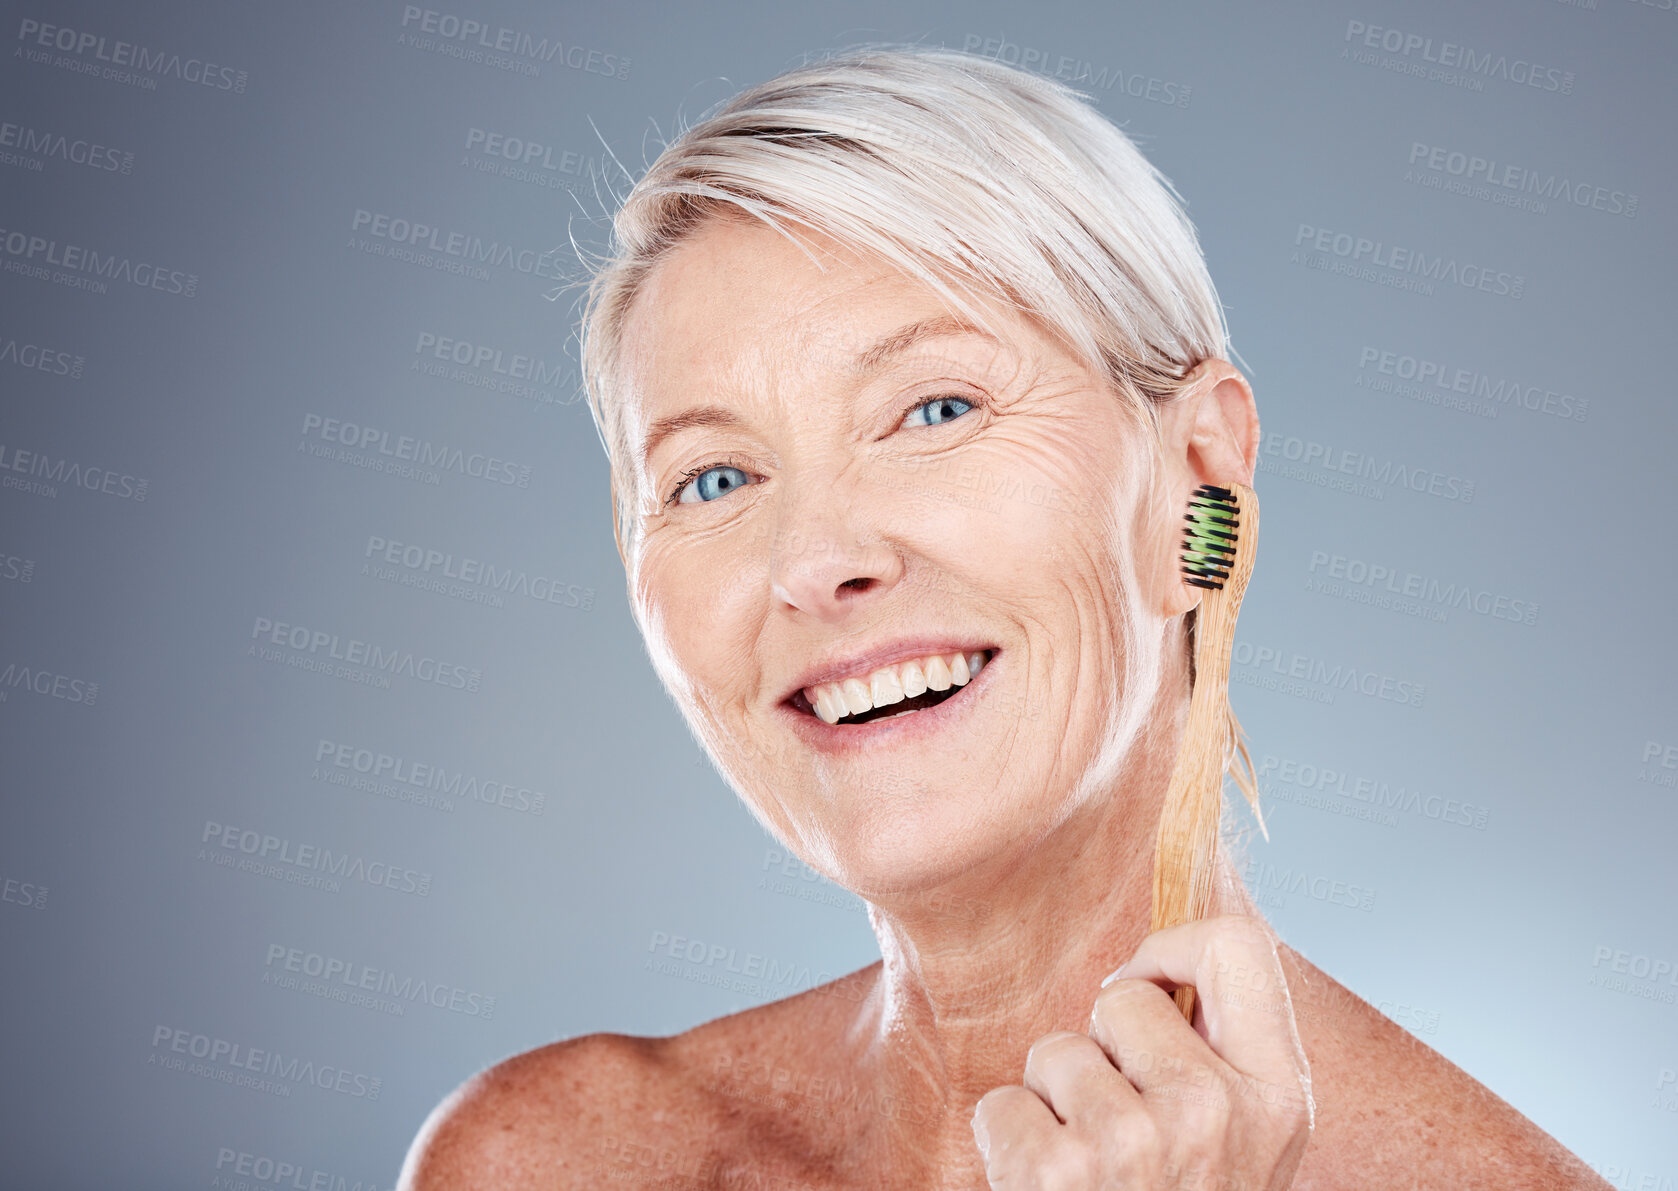 Buy stock photo Toothbrush, smile and portrait of a senior woman with a healthy dental routine in a studio. Wellness, cosmetics and happy elderly model with oral care, hygiene and health isolated by gray background.